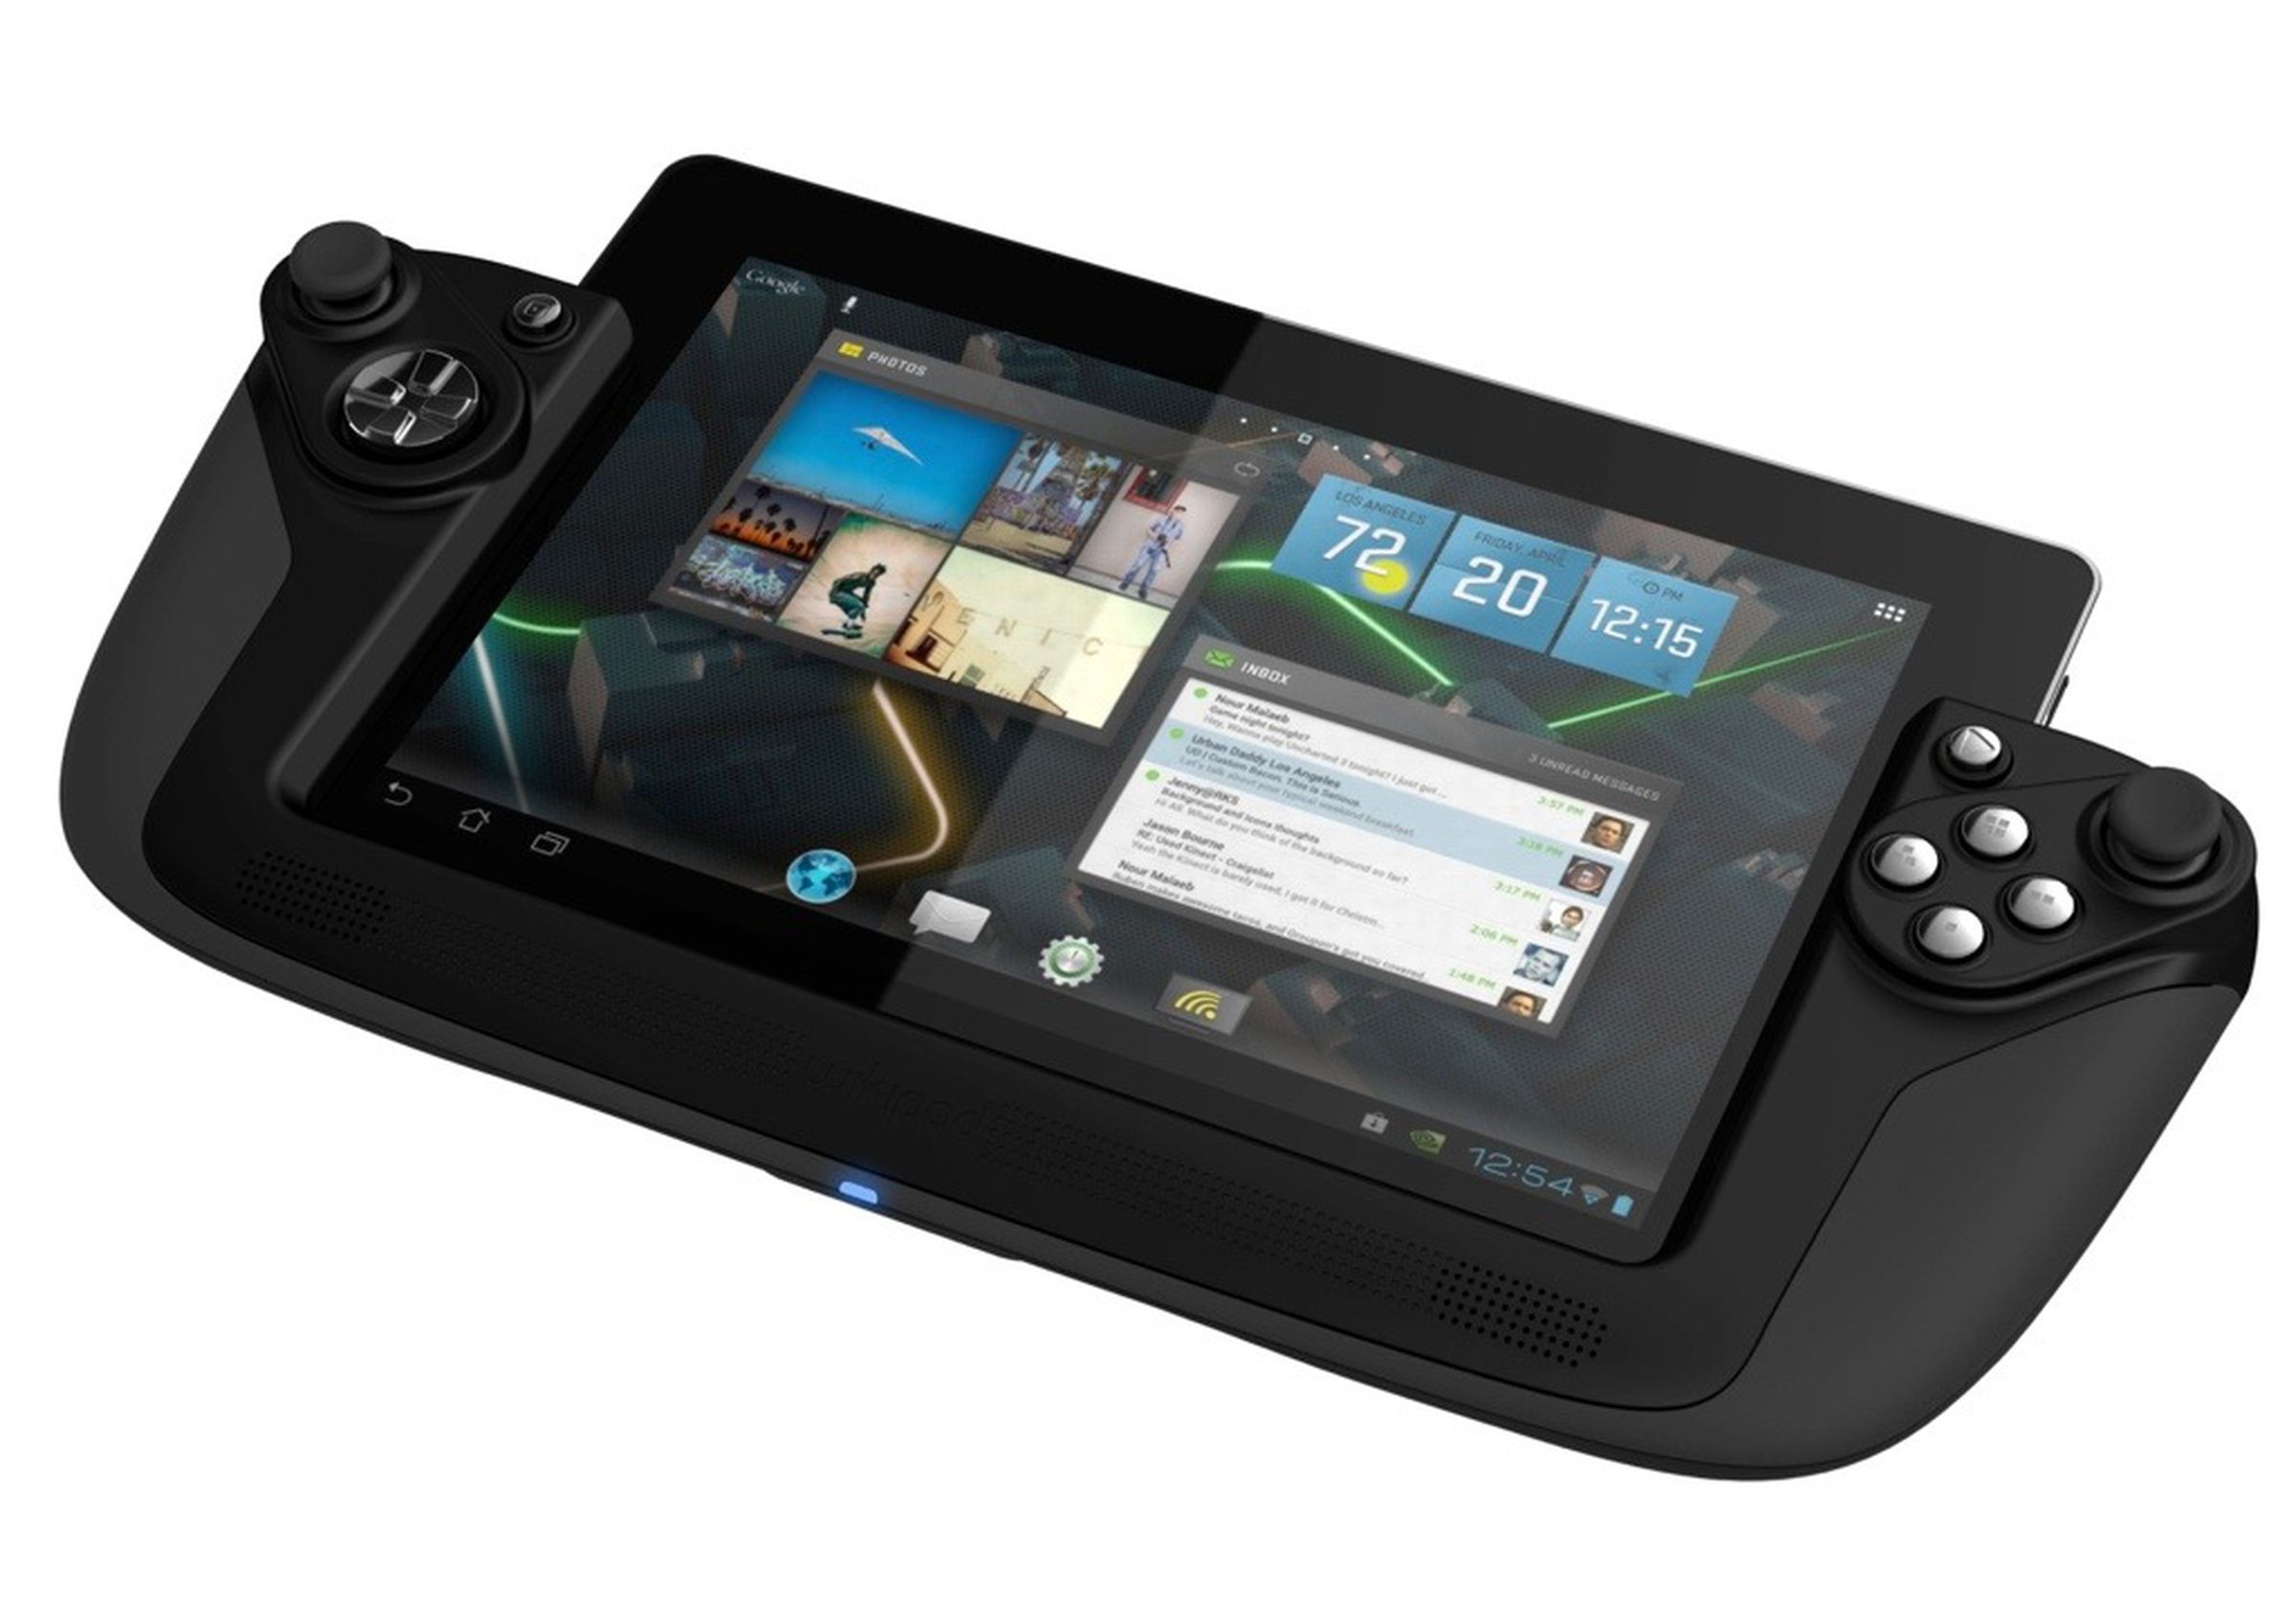 Wikipad gaming tablet press pictures